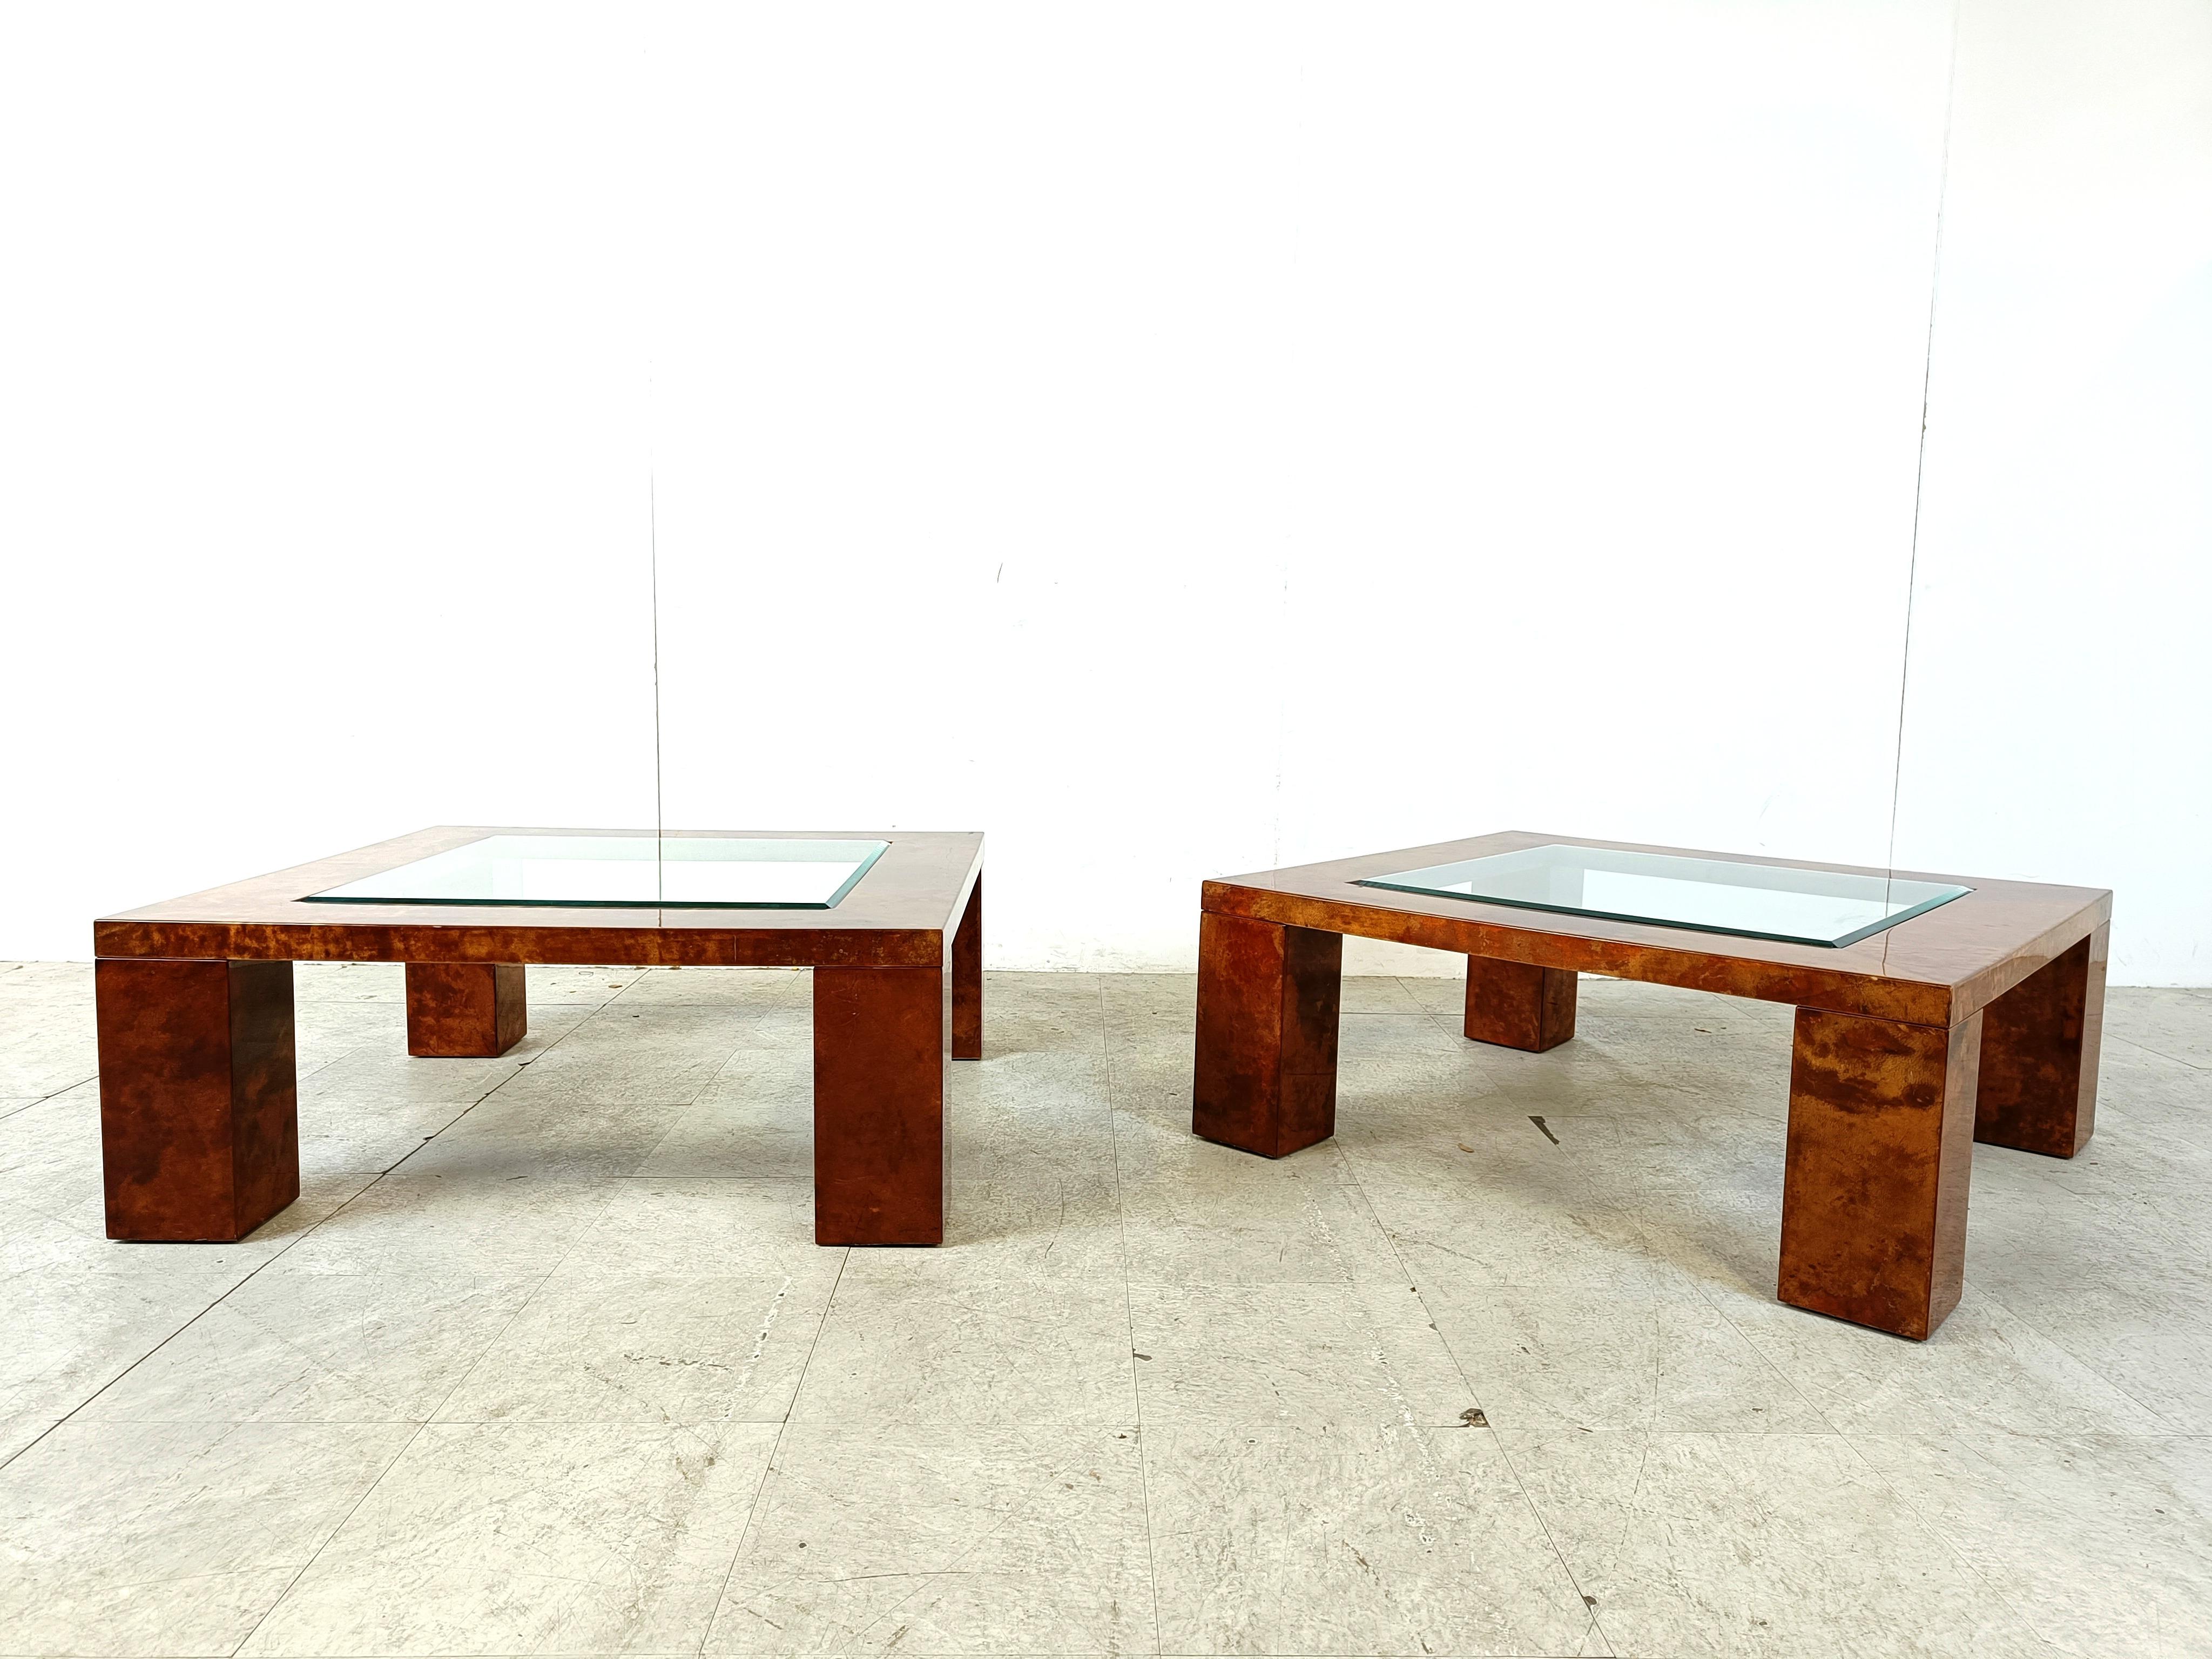 Aldo Tura Lacquered Goatskin Coffee Tables, 1960s - set of 2 For Sale 1